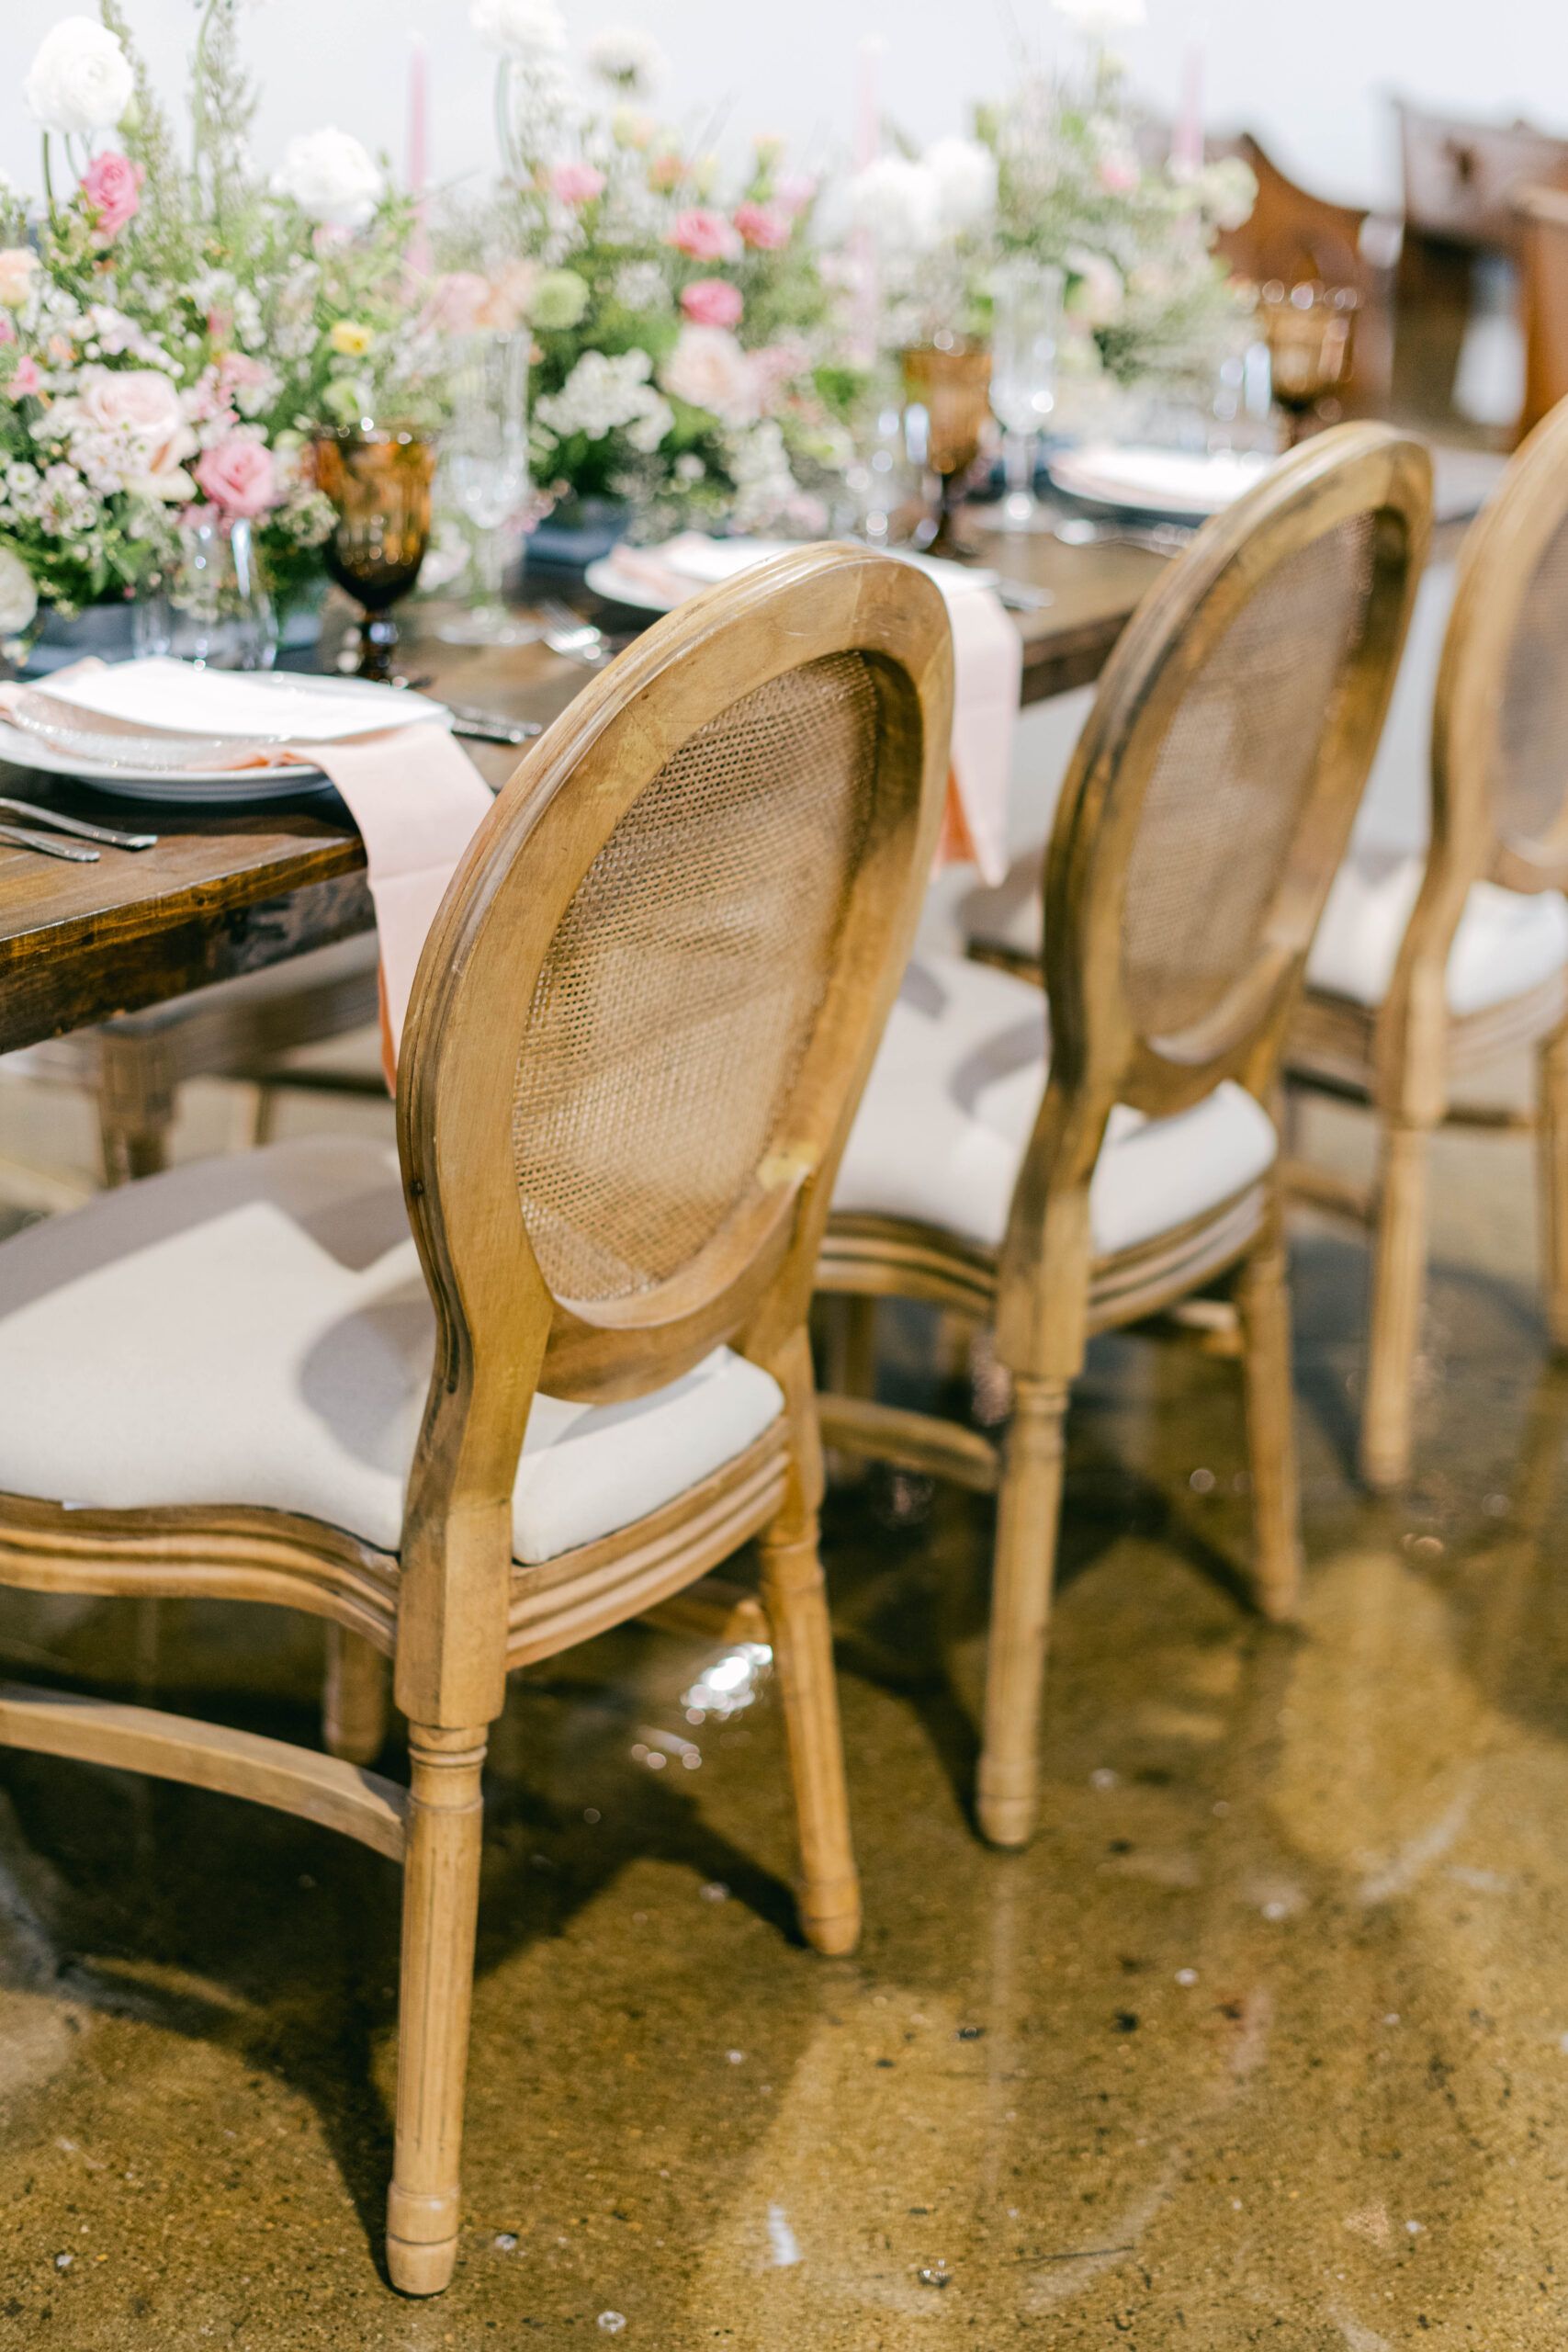 Hot Sale Luxury Vintage French Louis Chair Wedding Chair Banquet GOST  Dining Chair Event Stacking LV Rental Wood Chairs - China Louis Chair, Luis  Chair